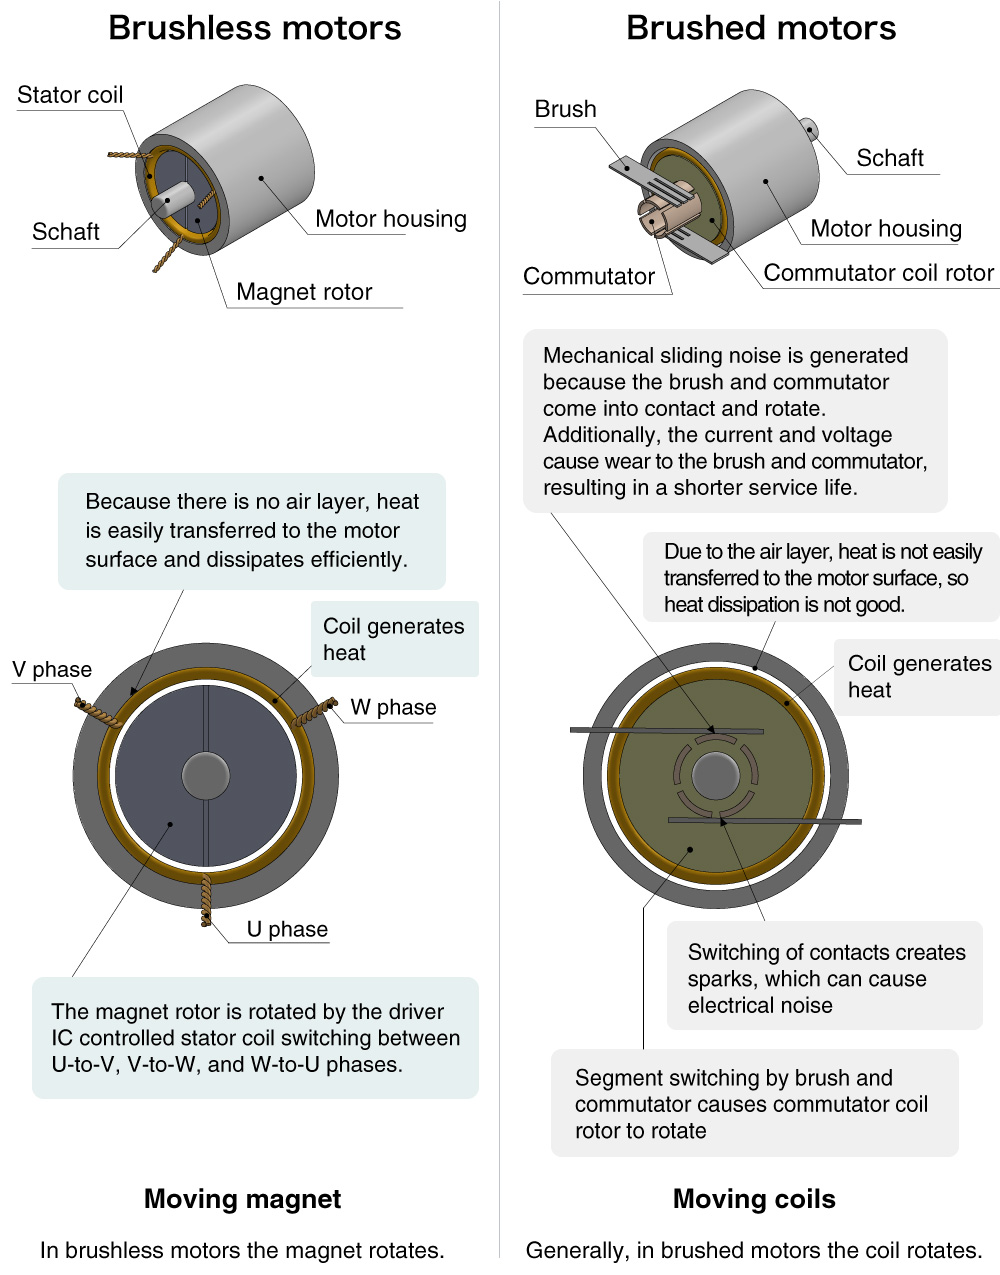 Moving magnet: In brushless motors the magnet rotates. brushless motors have Stator coil and Magnet rotor.
Moving coils: Generally, in brushed motors the coil rotates. Brushed motors have brush, commutator and commutator coil rotor
